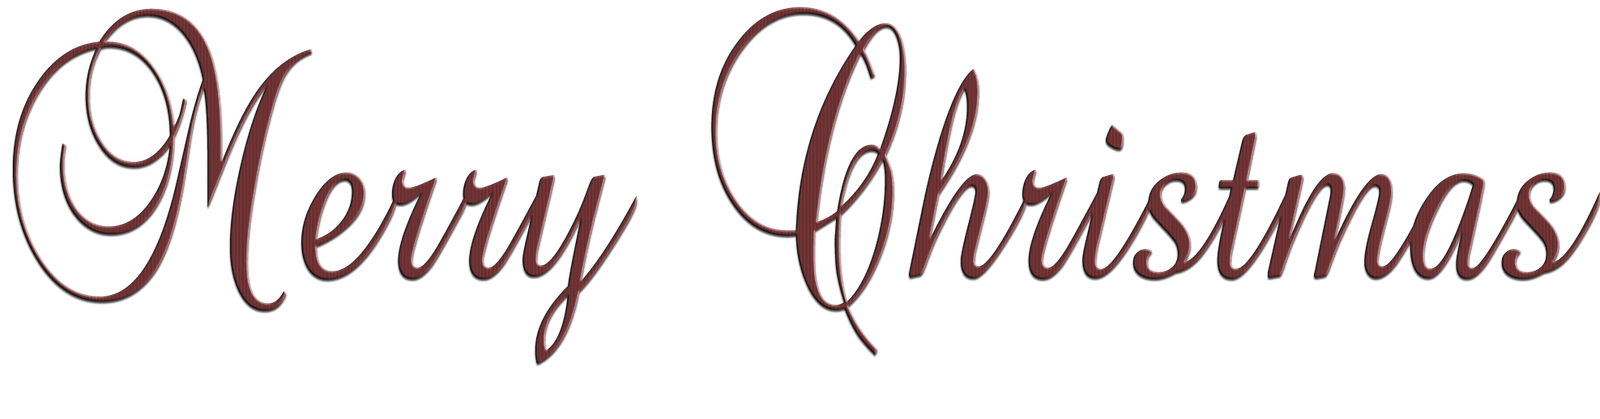 Merry Christmas Calligraphy And Typography Element